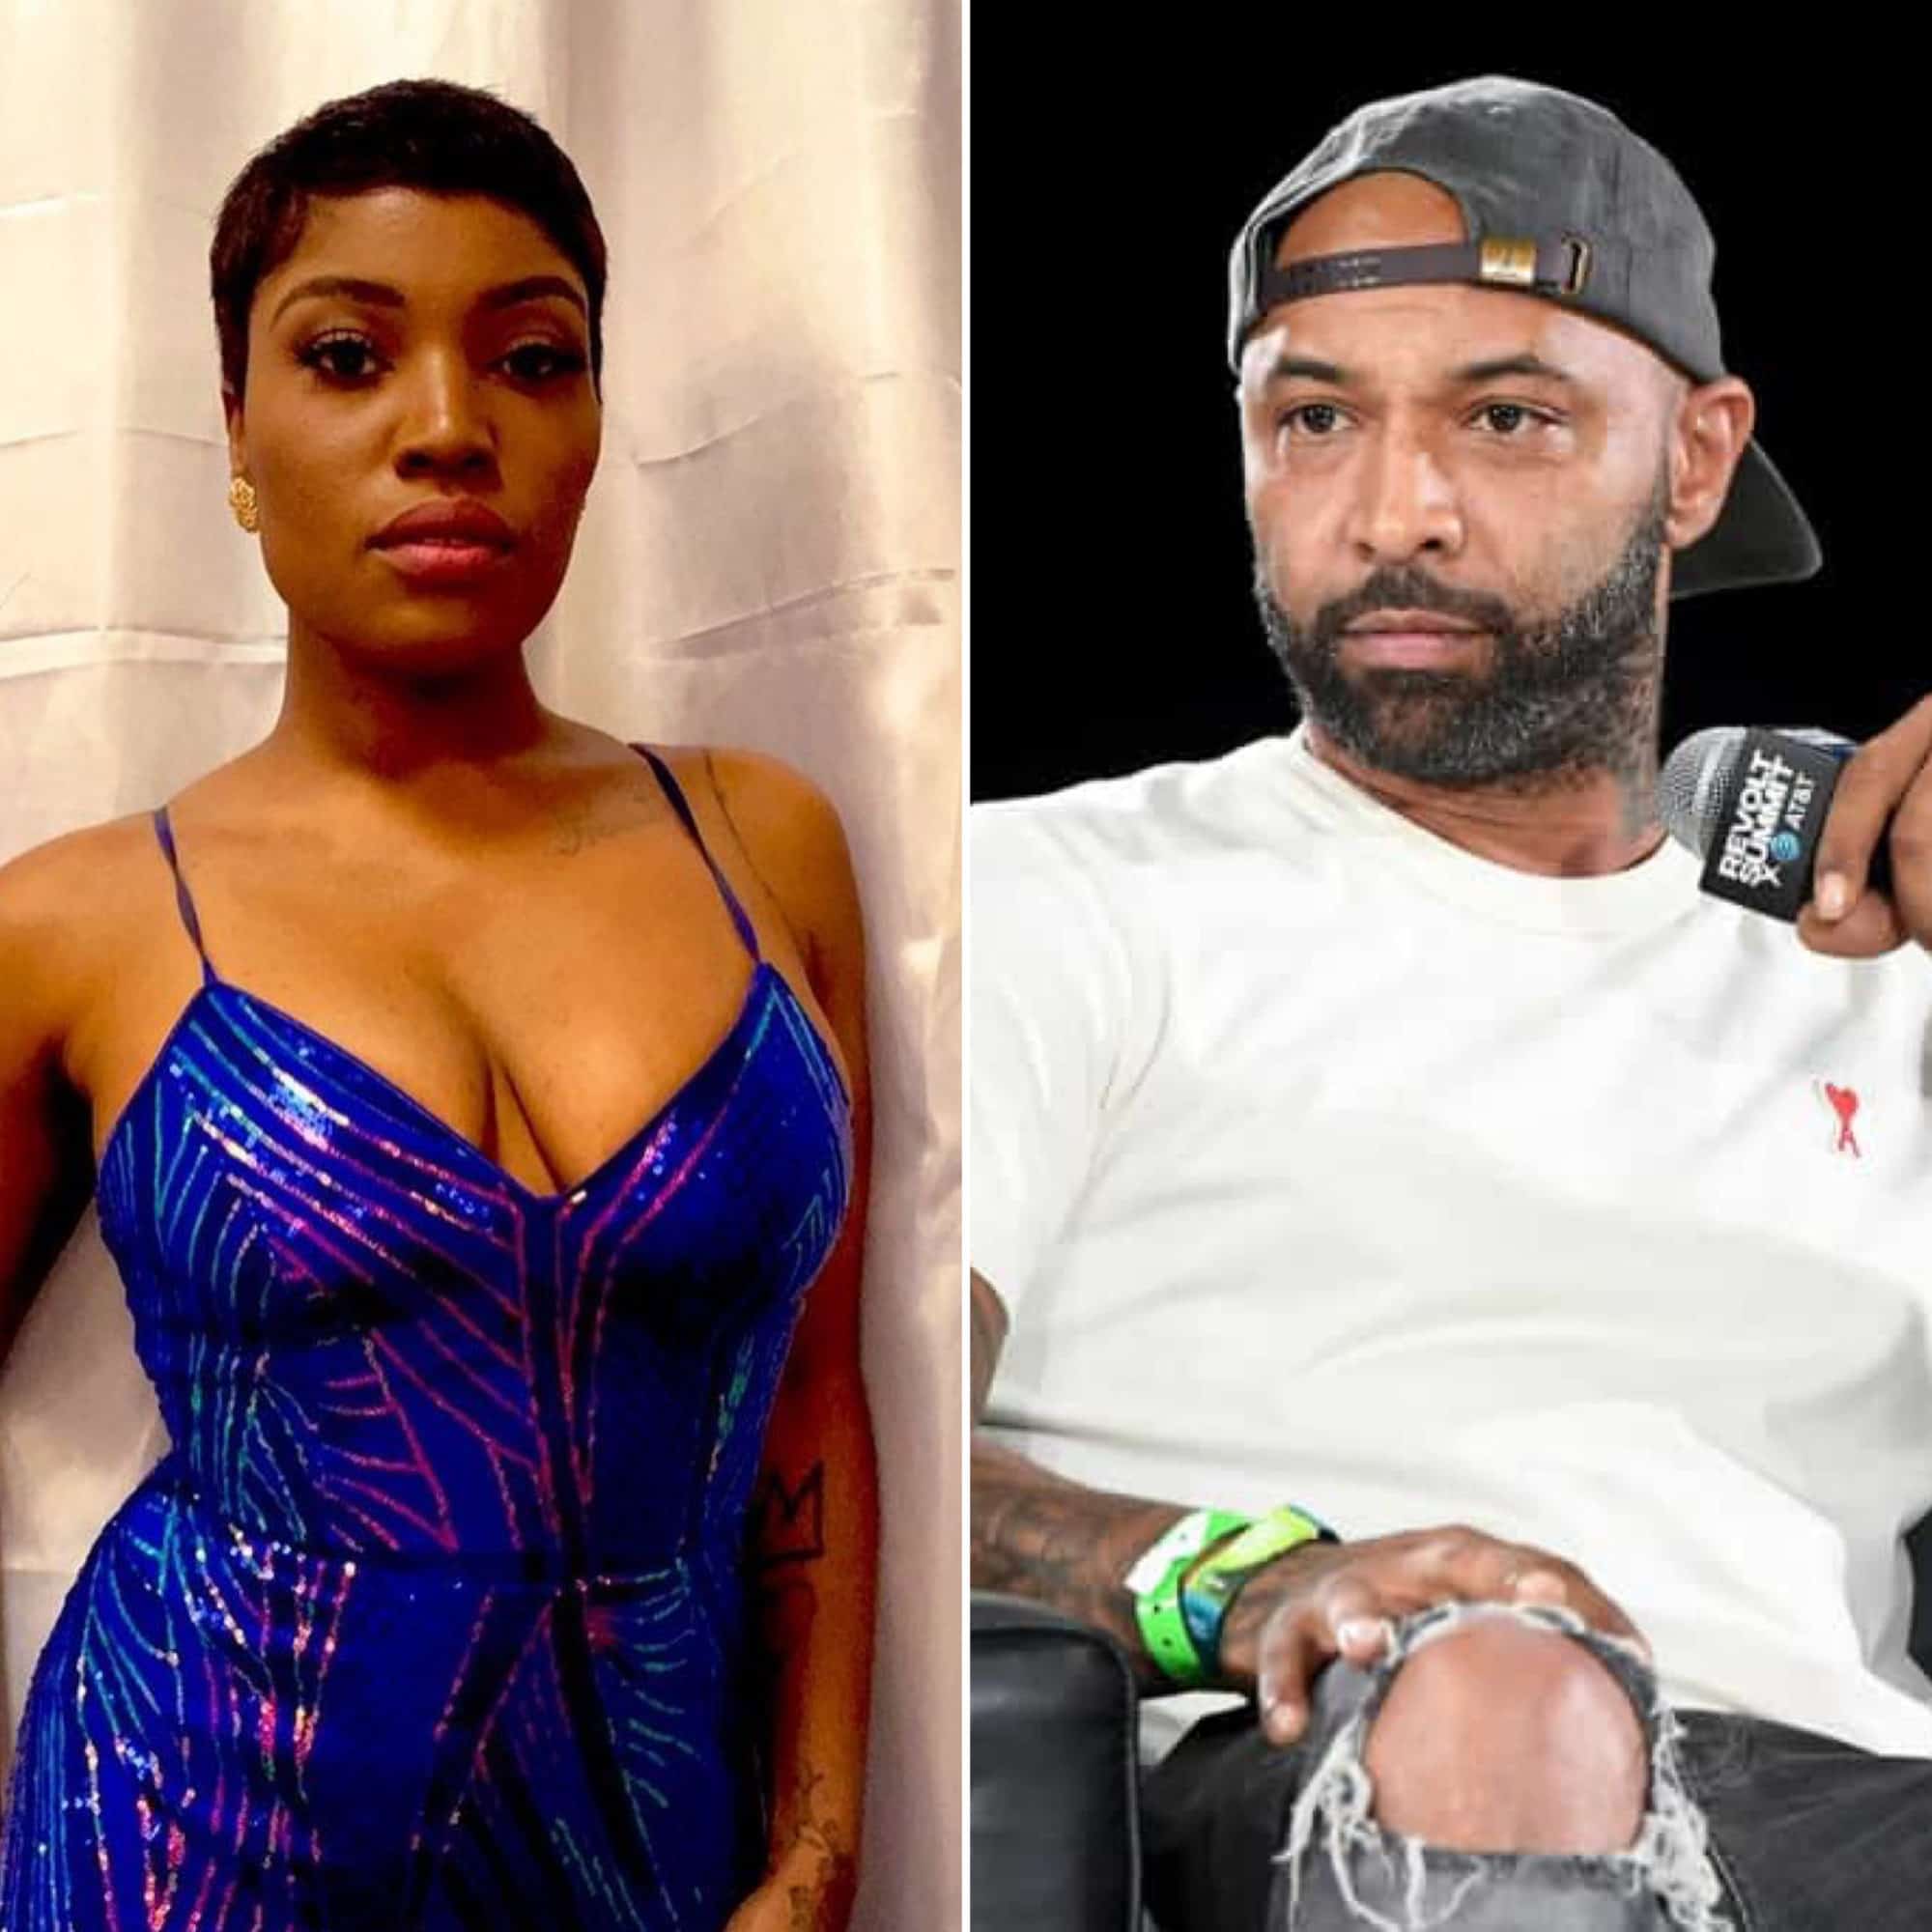 DJ Olivia Dope to Instagram to claimed she was sexually harassed by Joe Bud...